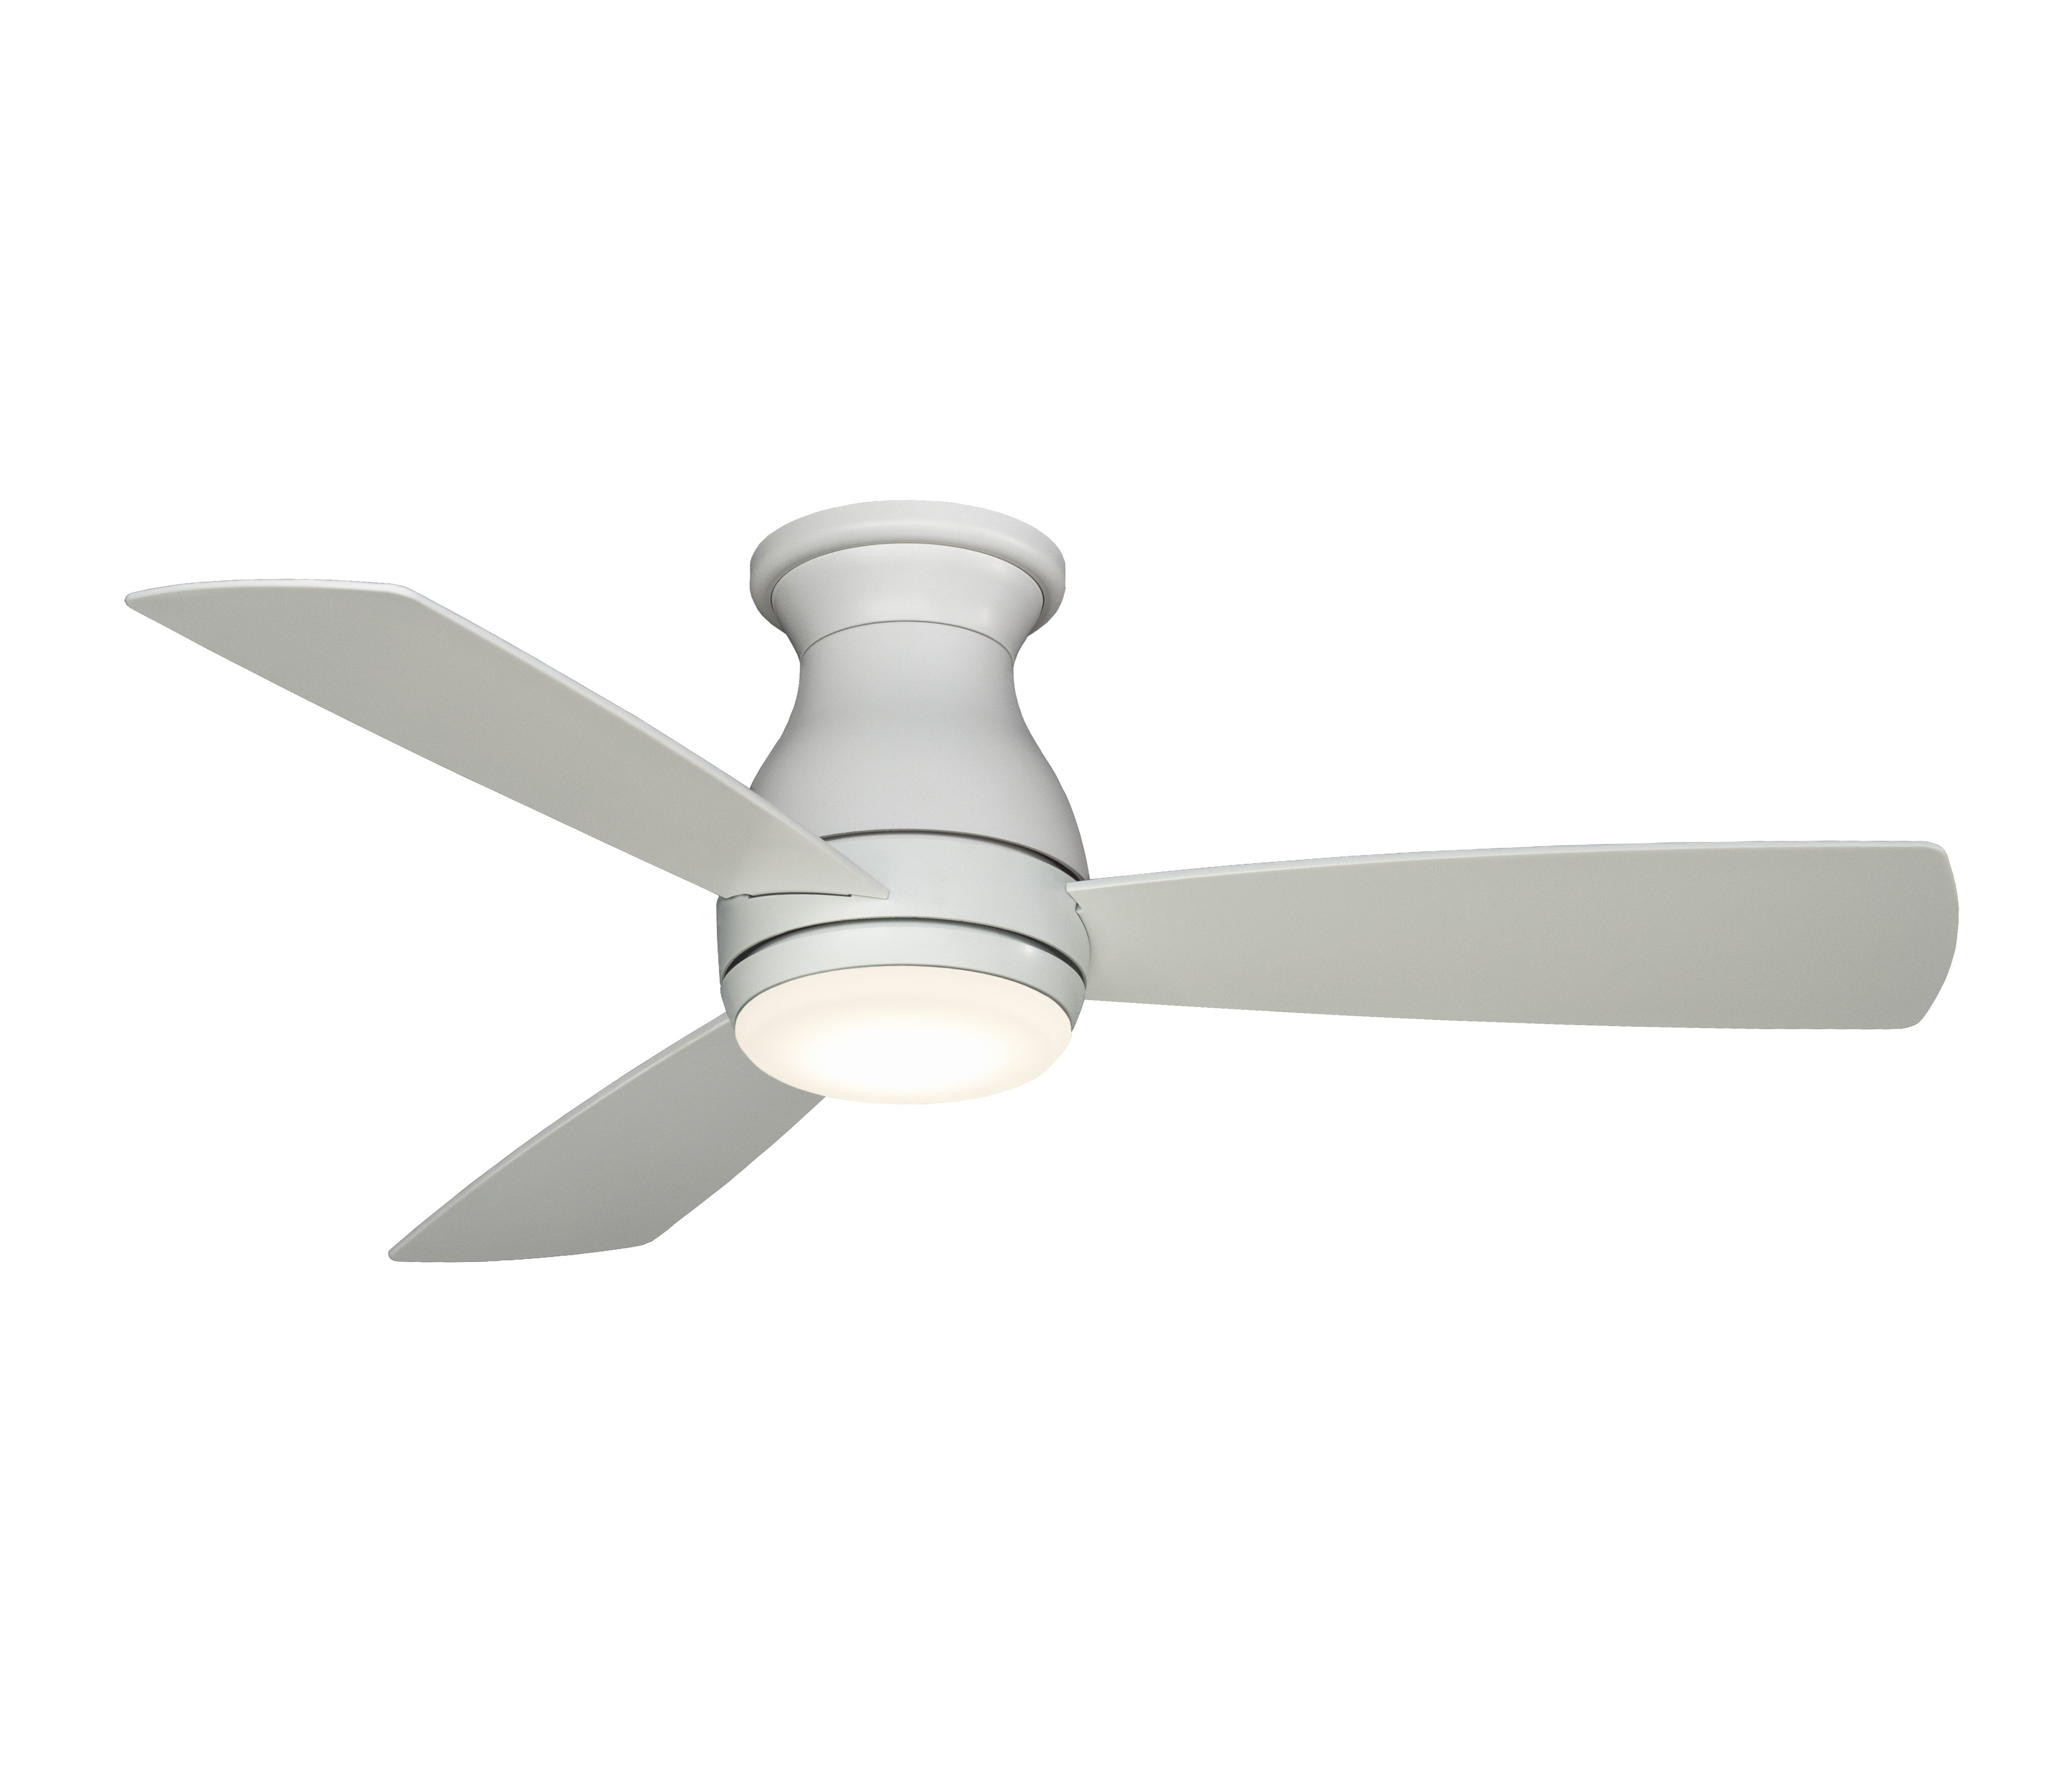 Fanimation 44 Hugh 3 Blade Outdoor Led Flush Mount Ceiling Fan With Remote Control And Light Kit Included Reviews Wayfair